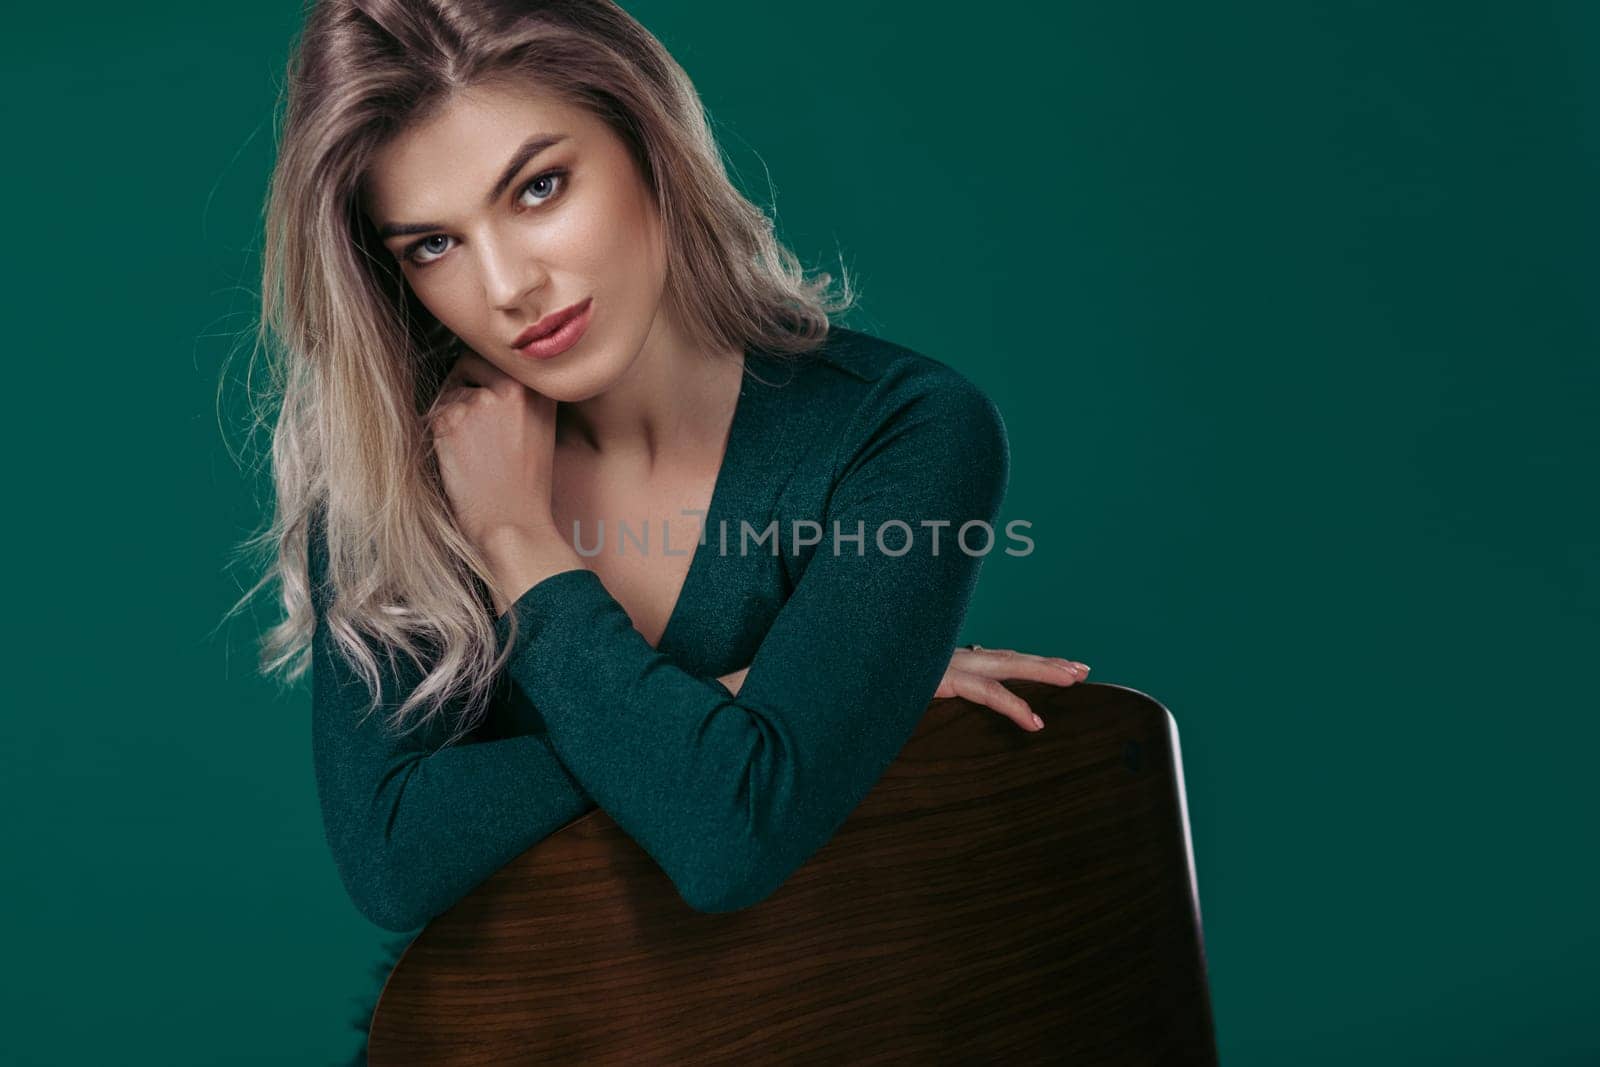 fashion portrait of sensual beautiful blonde woman in green dress sitting on chair and looking at camera against green background